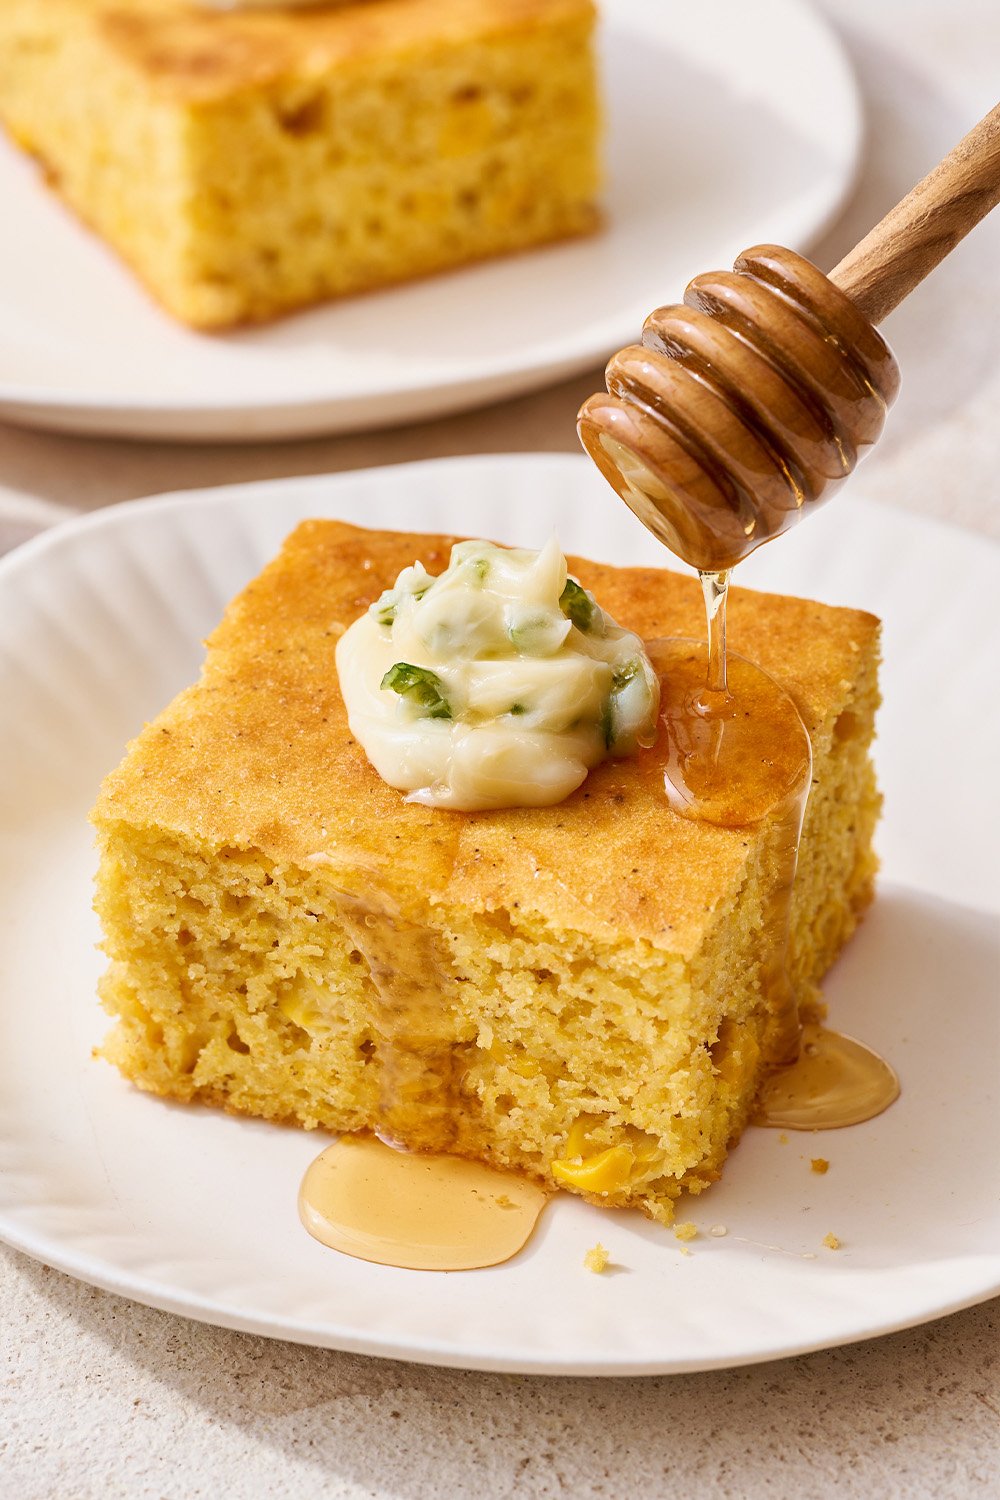 slice of cornbread on a plate with jalapeno butter piped on top, with honey being drizzled on top